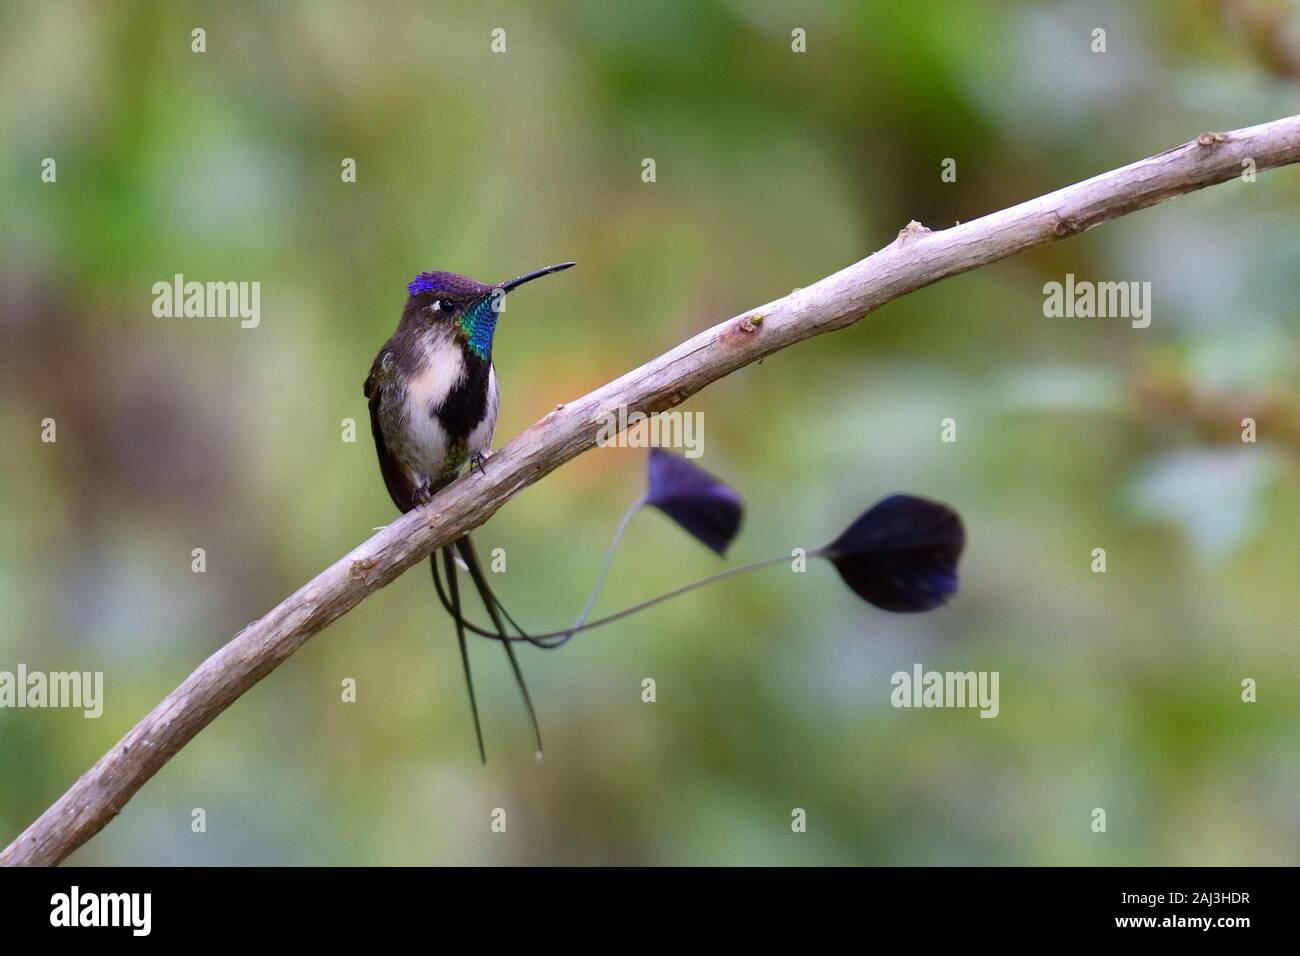 A Marvelous Spatuletail Hummingbird the most rare and spectacular hummingbird in the world Stock Photo